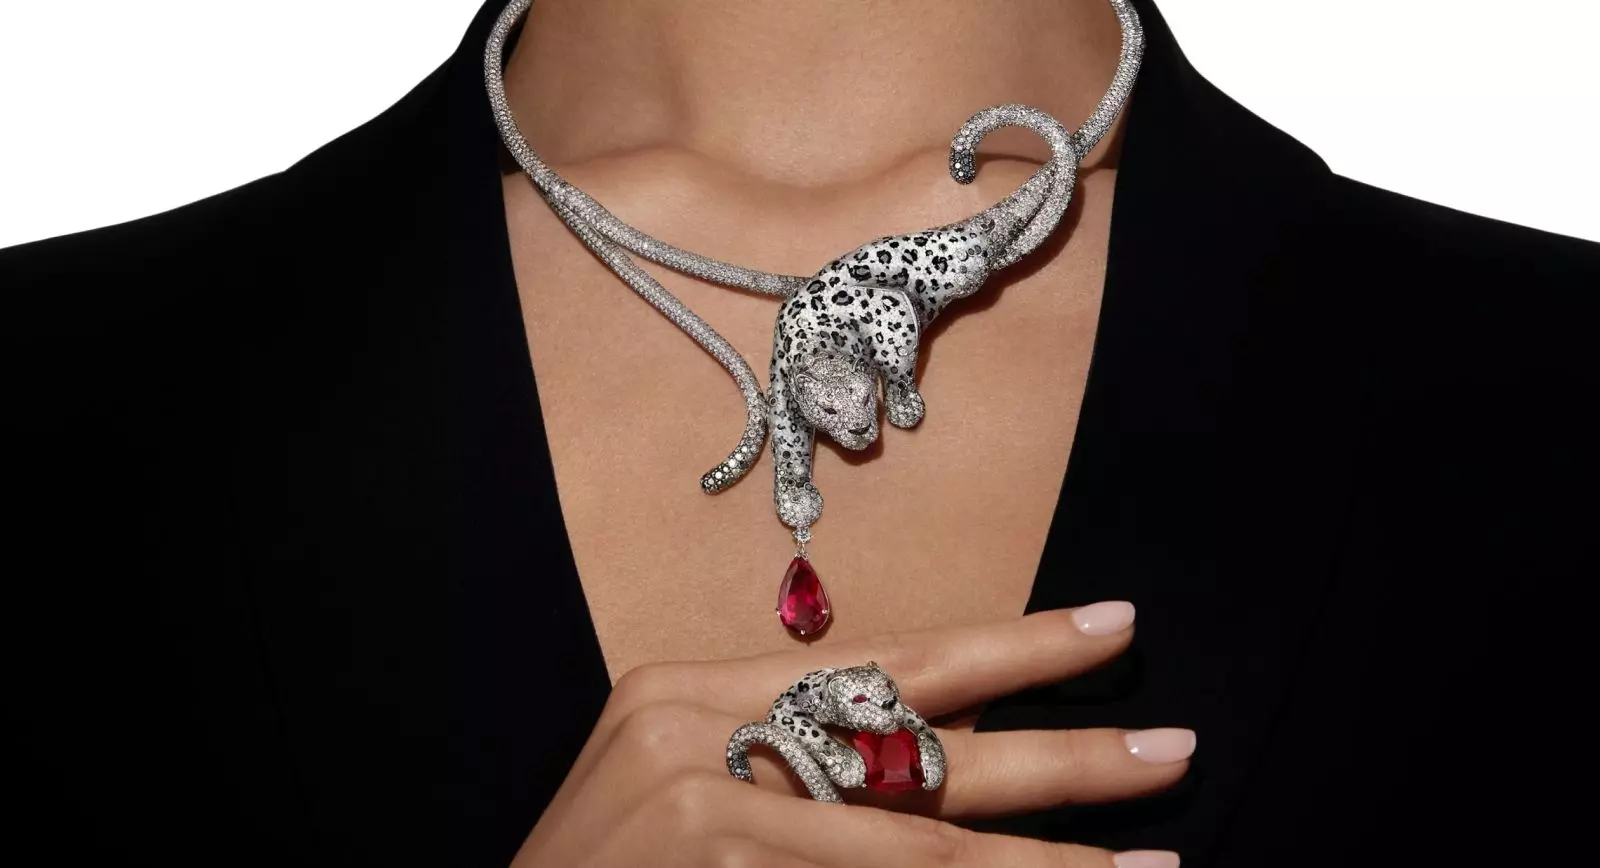 Sicis Damisa Ice necklace and ring ahead of the brand's Couture Show debut in 2023